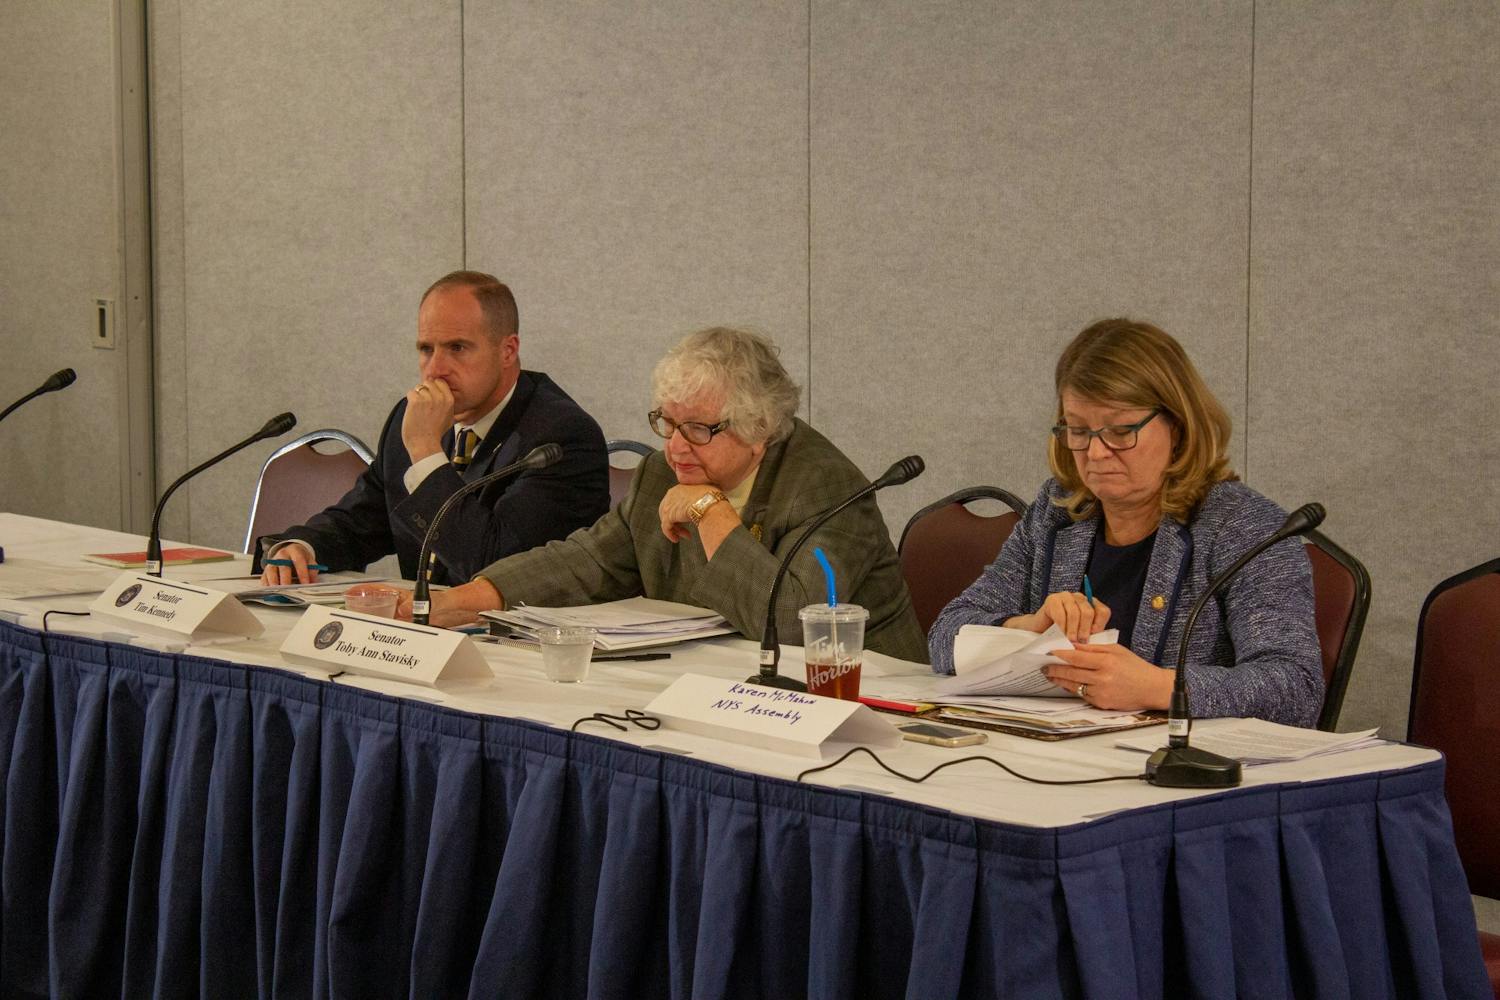 New York State Senator Timothy Kennedy, Assembly member Karen McMahon and Chair of the Higher Education Senate Committee Toby Ann Stavisky discuss higher education and tuition at the SUNY transparency bill discussion at the Center for Tomorrow on Wednesday.&nbsp;